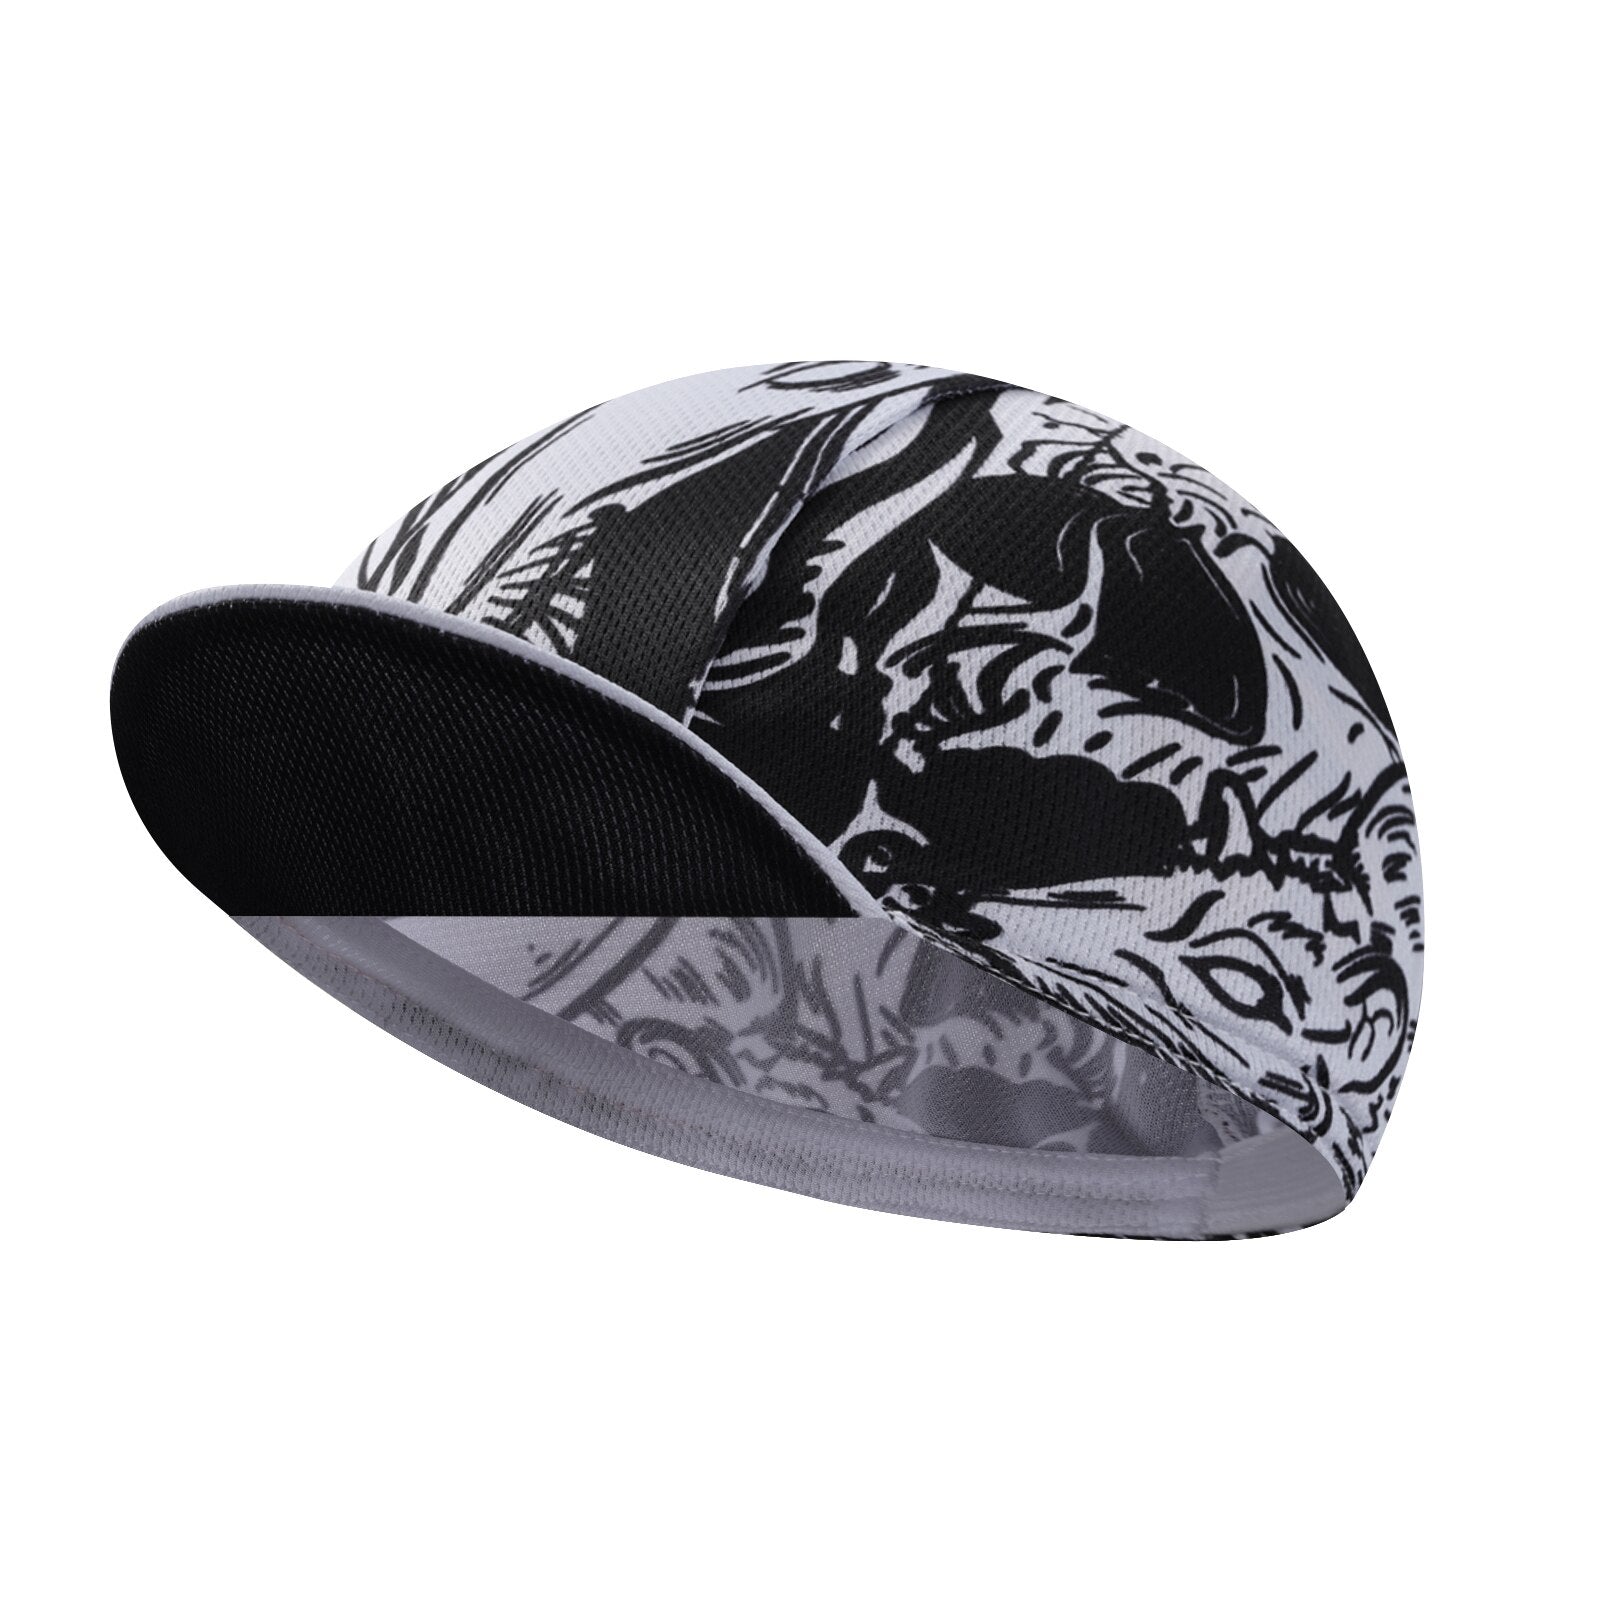 Men's Cycling Cap - Polyester Skull Cycling Hat-Under Helmet - Cycling Helmet Liner Breathable&Sweat Uptake